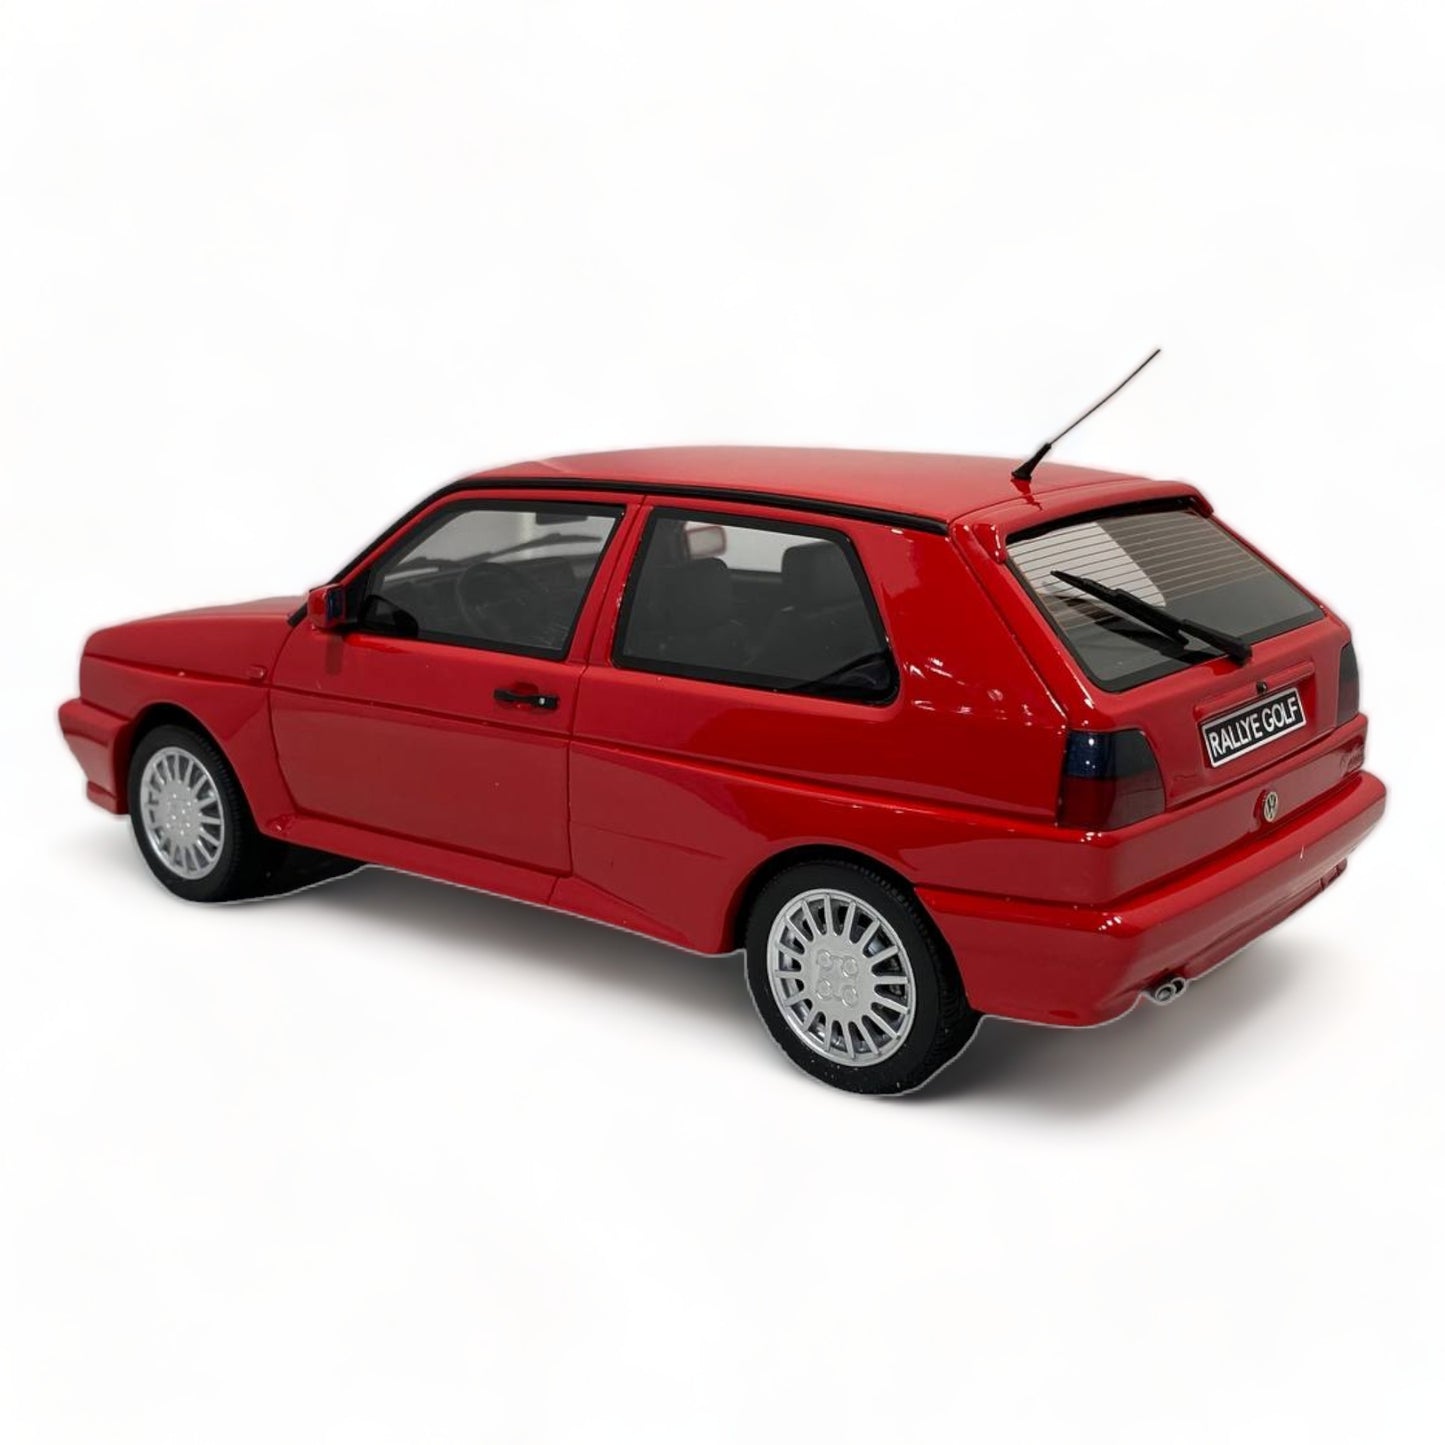 1/18 Resin OTTO Volkswagen Golf Rally - Red Miniature Car